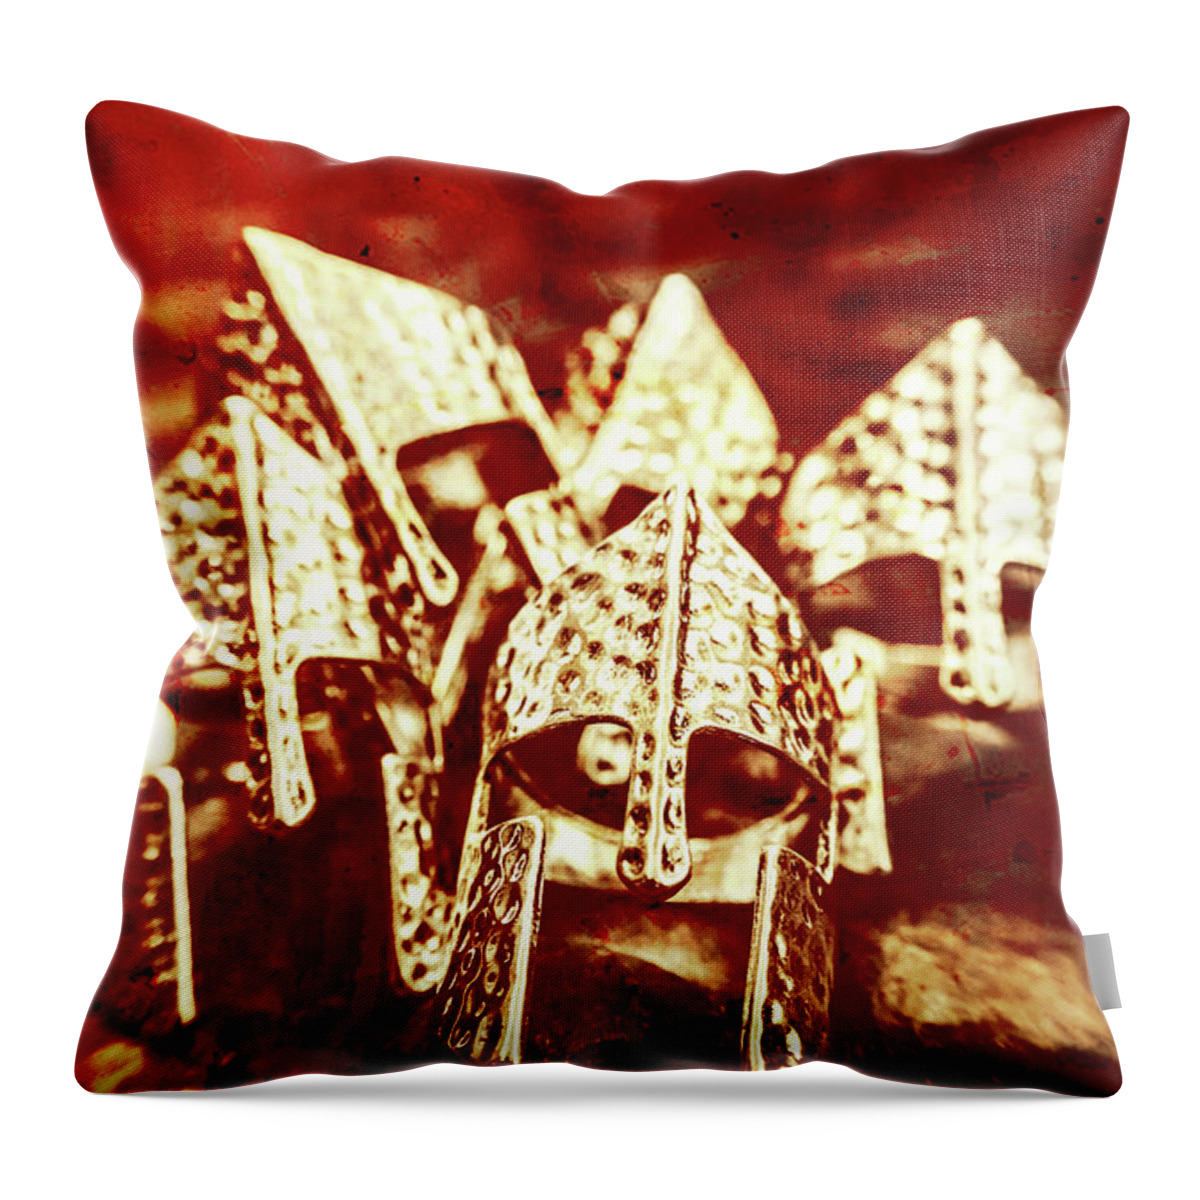 War Throw Pillow featuring the photograph Battlefield of lost empires by Jorgo Photography